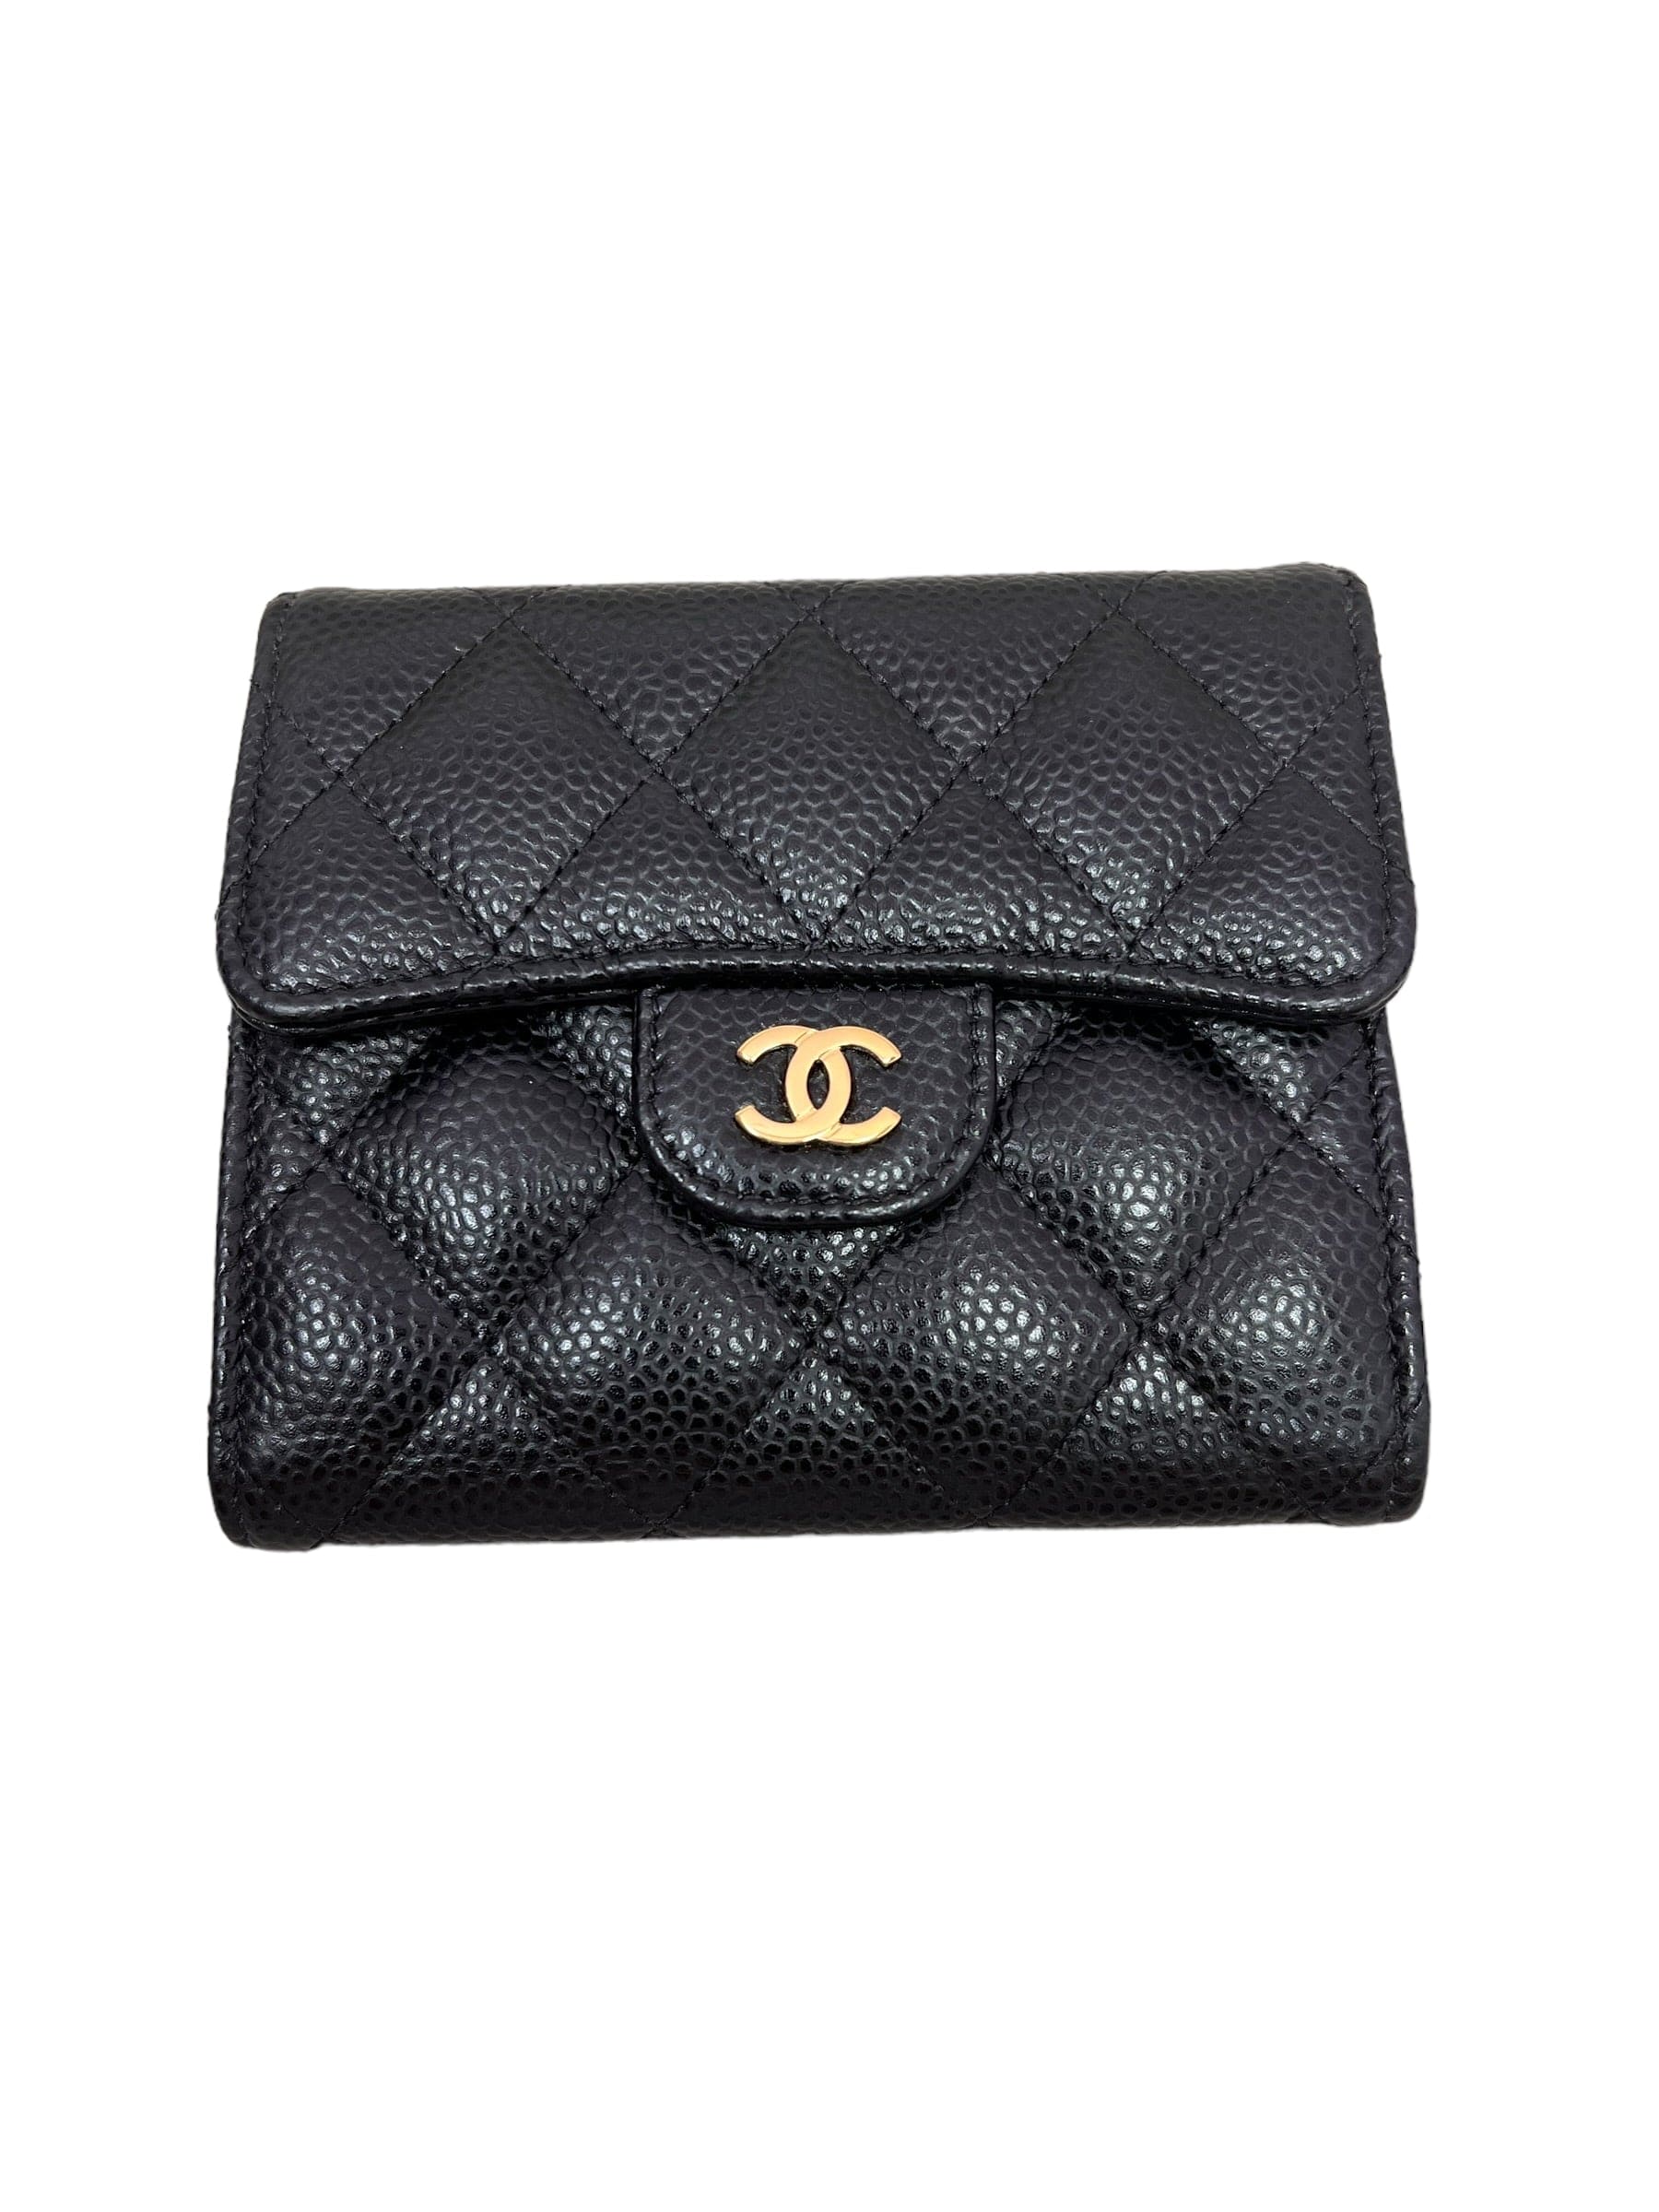 Chanel 19 Coin Purse Flap, Used & Preloved Chanel Crossbody Bag, LXR USA, White